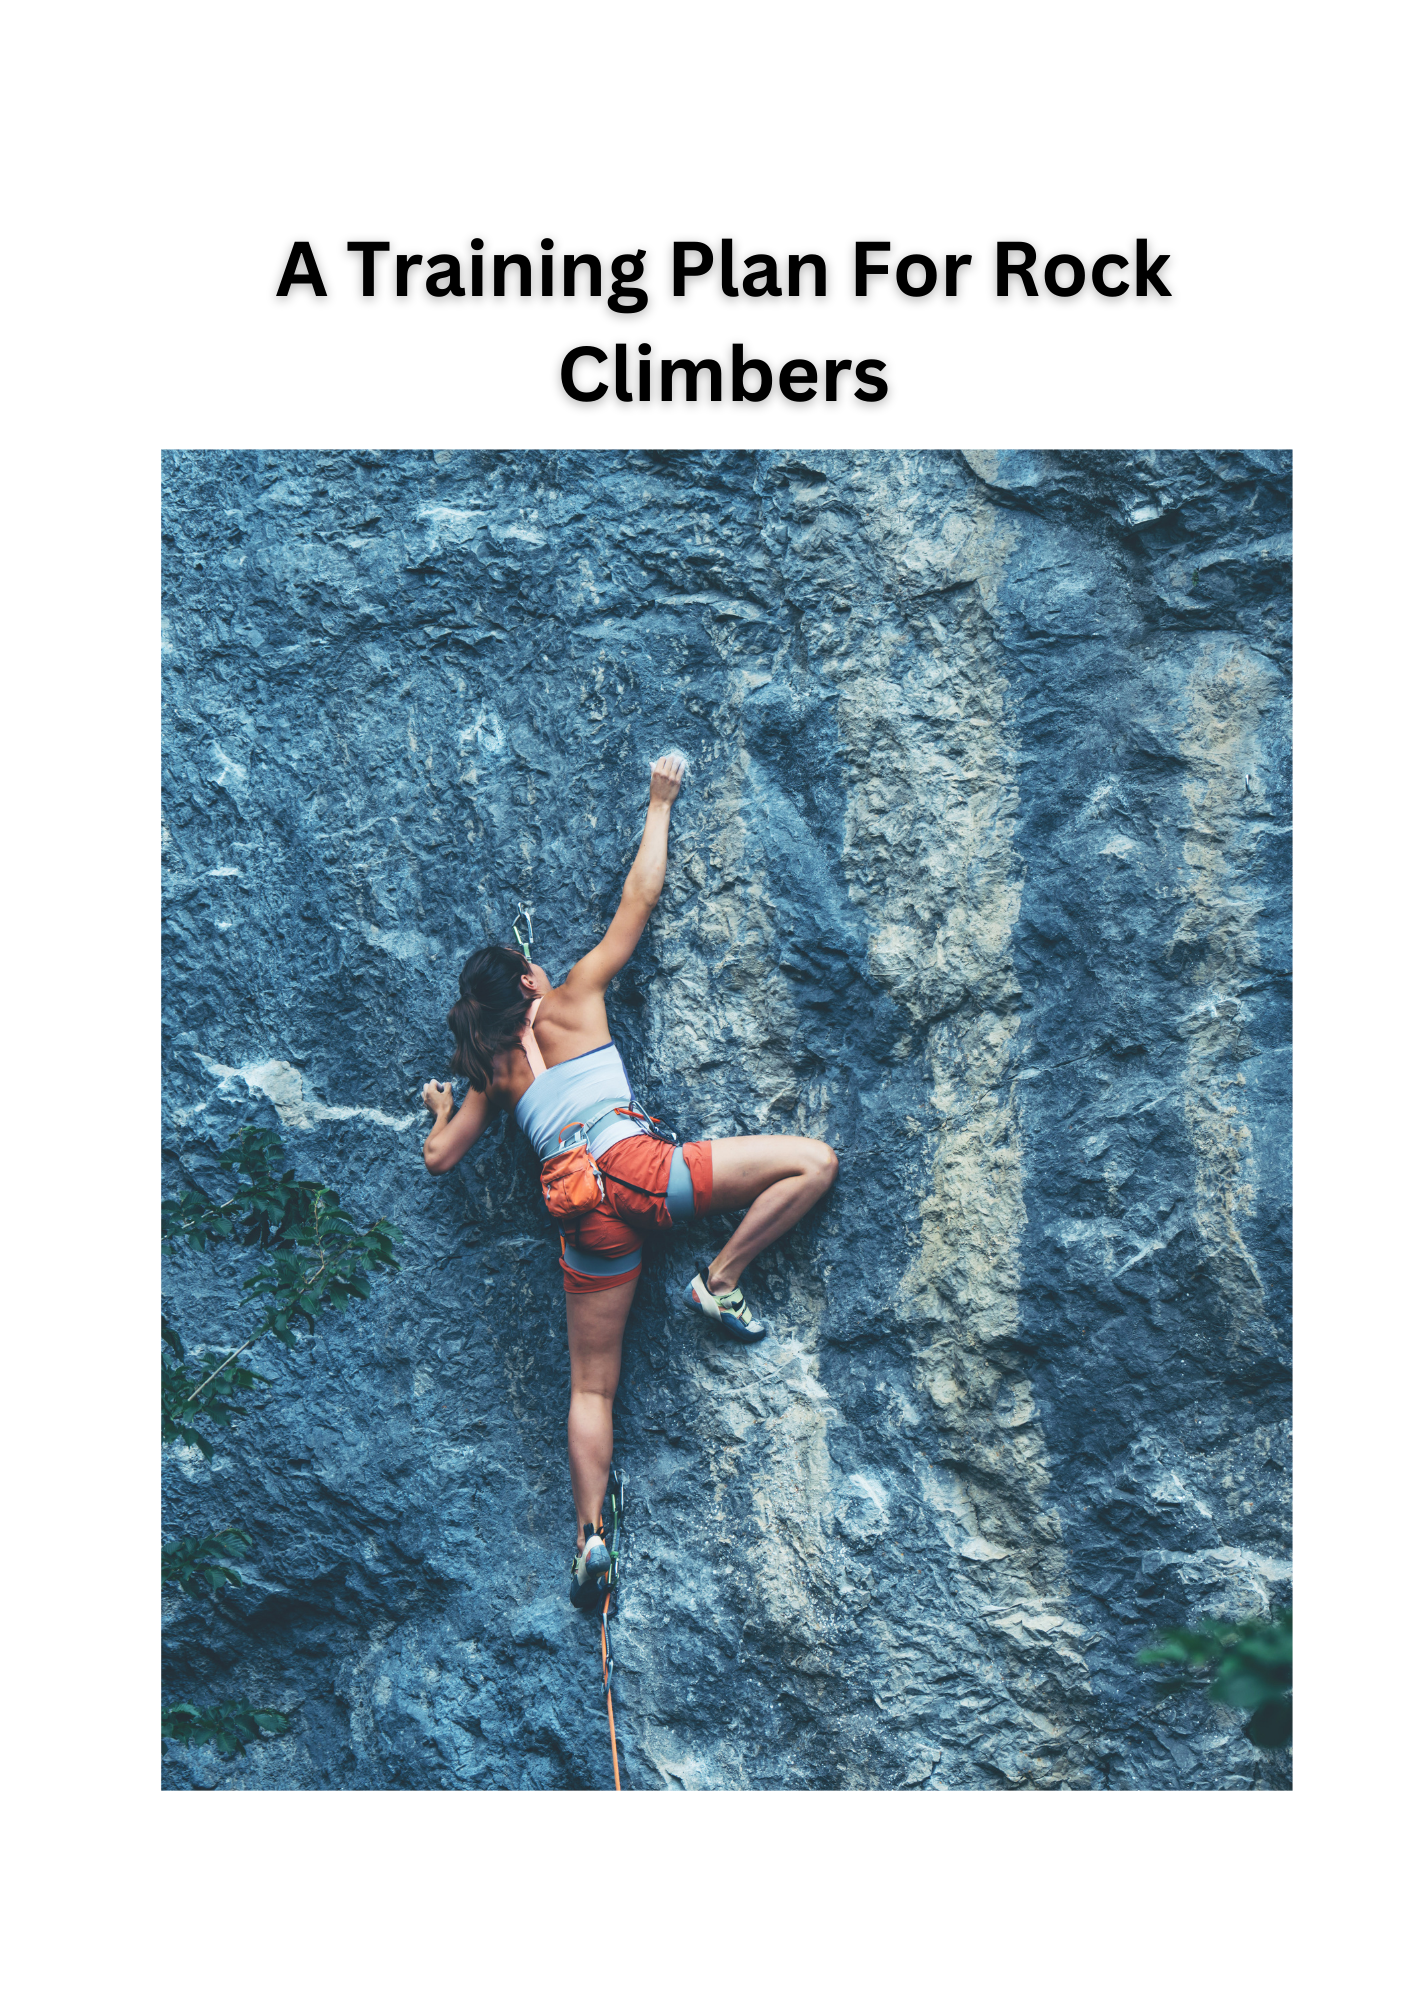 A training guide for rock climbers